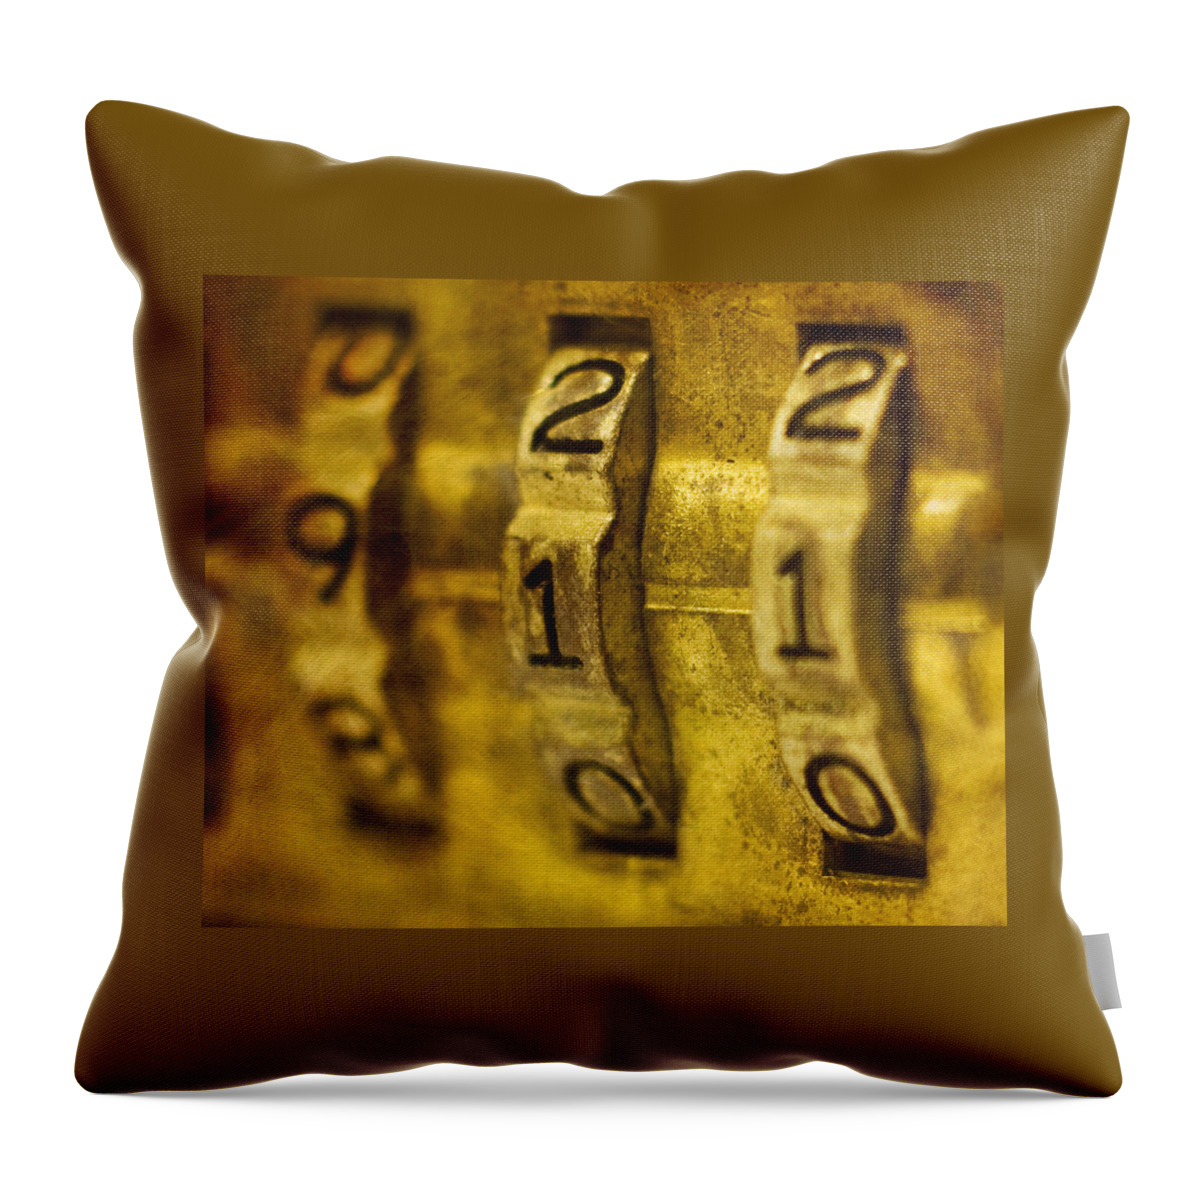 911 Throw Pillow featuring the photograph The Web Of Nine Eleven by Steven Richardson